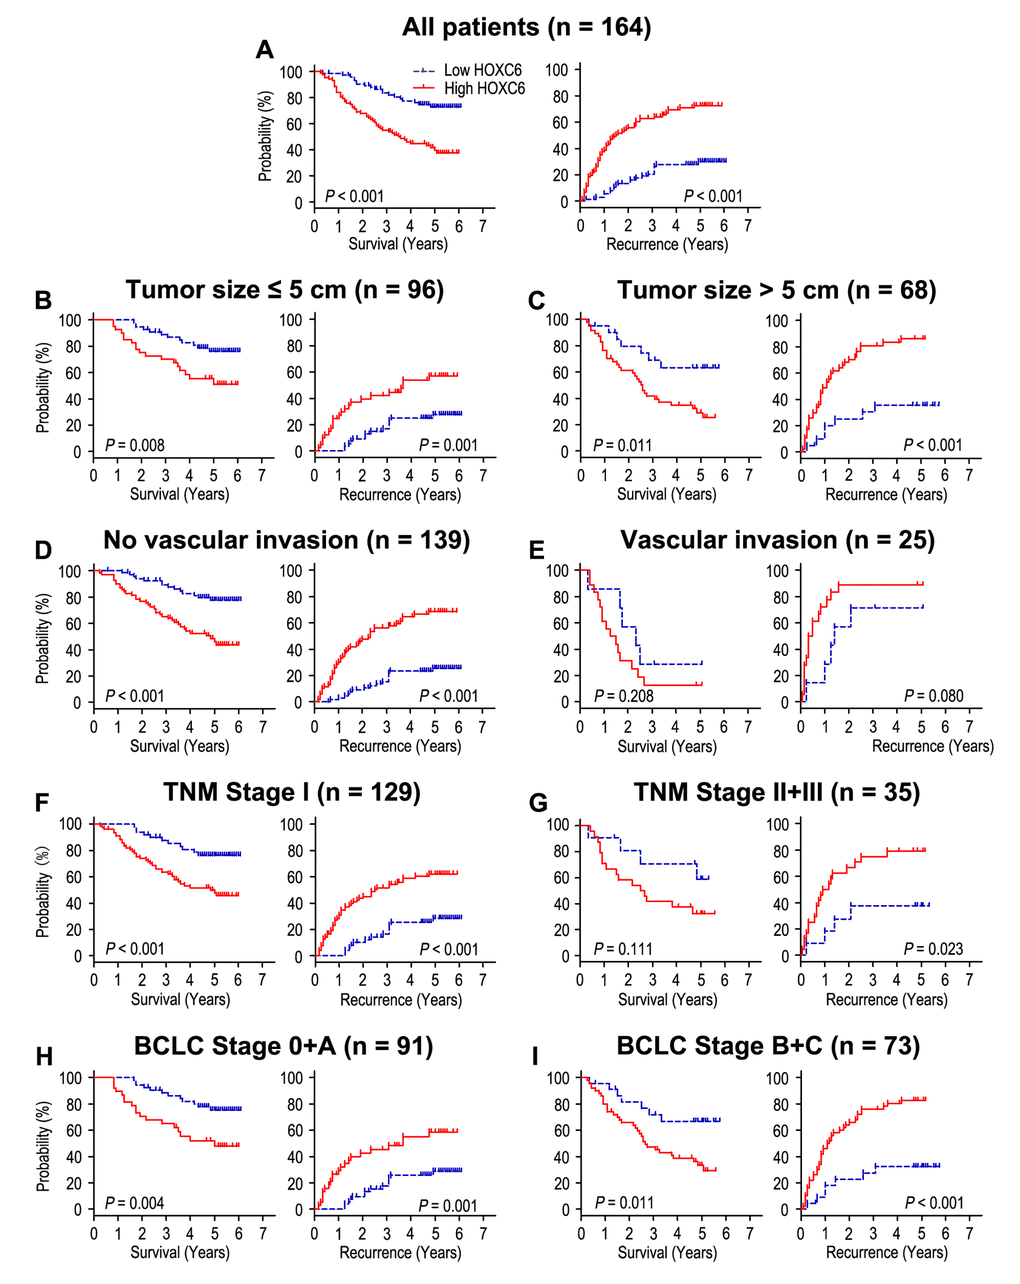 Overall survival and time to recurrence are shown for patients with HCC. All patients were classified according to tumor size, vascular invasion, TNM stage and BCLC stage. Kaplan-Meier survival estimates and log-rank tests were used to analyze the prognostic value of HOXC6 expression in all patients (A) and each subgroup (B-I).